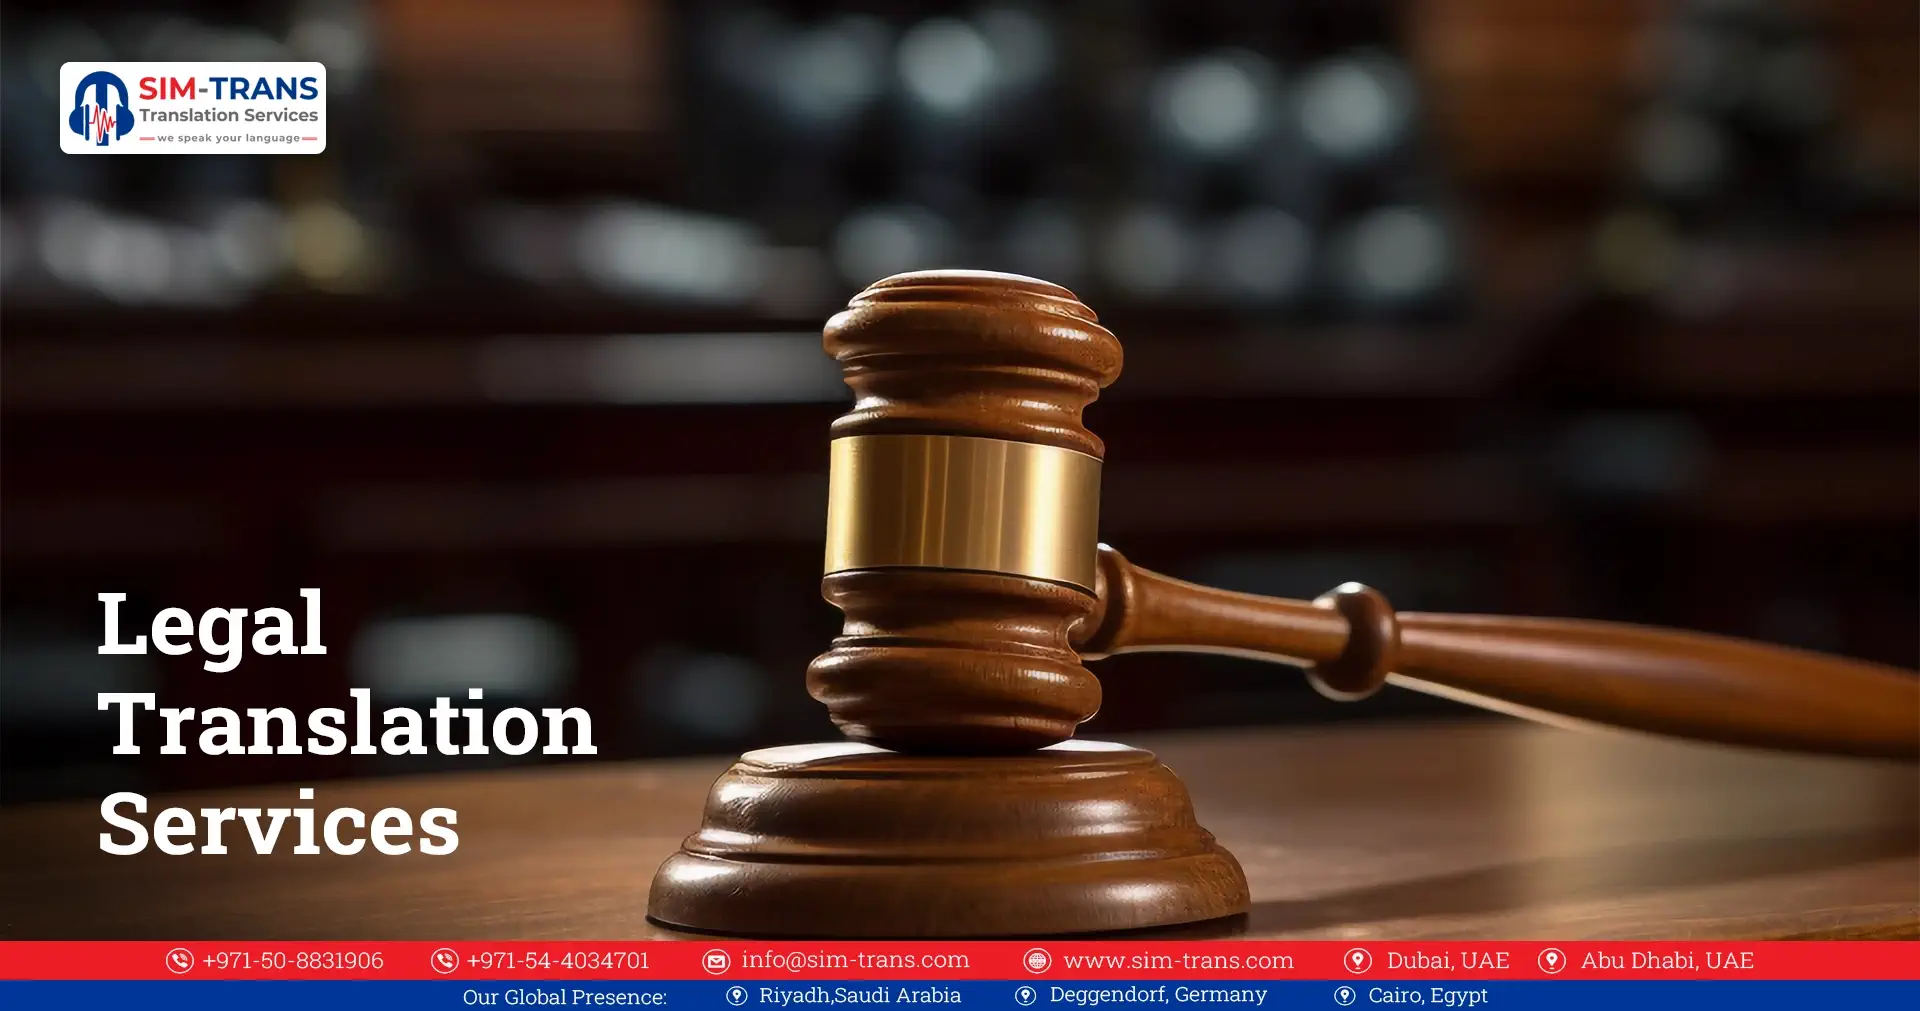 Legal Translation Services in Dubai: Trust Sim-trans for Your Needs